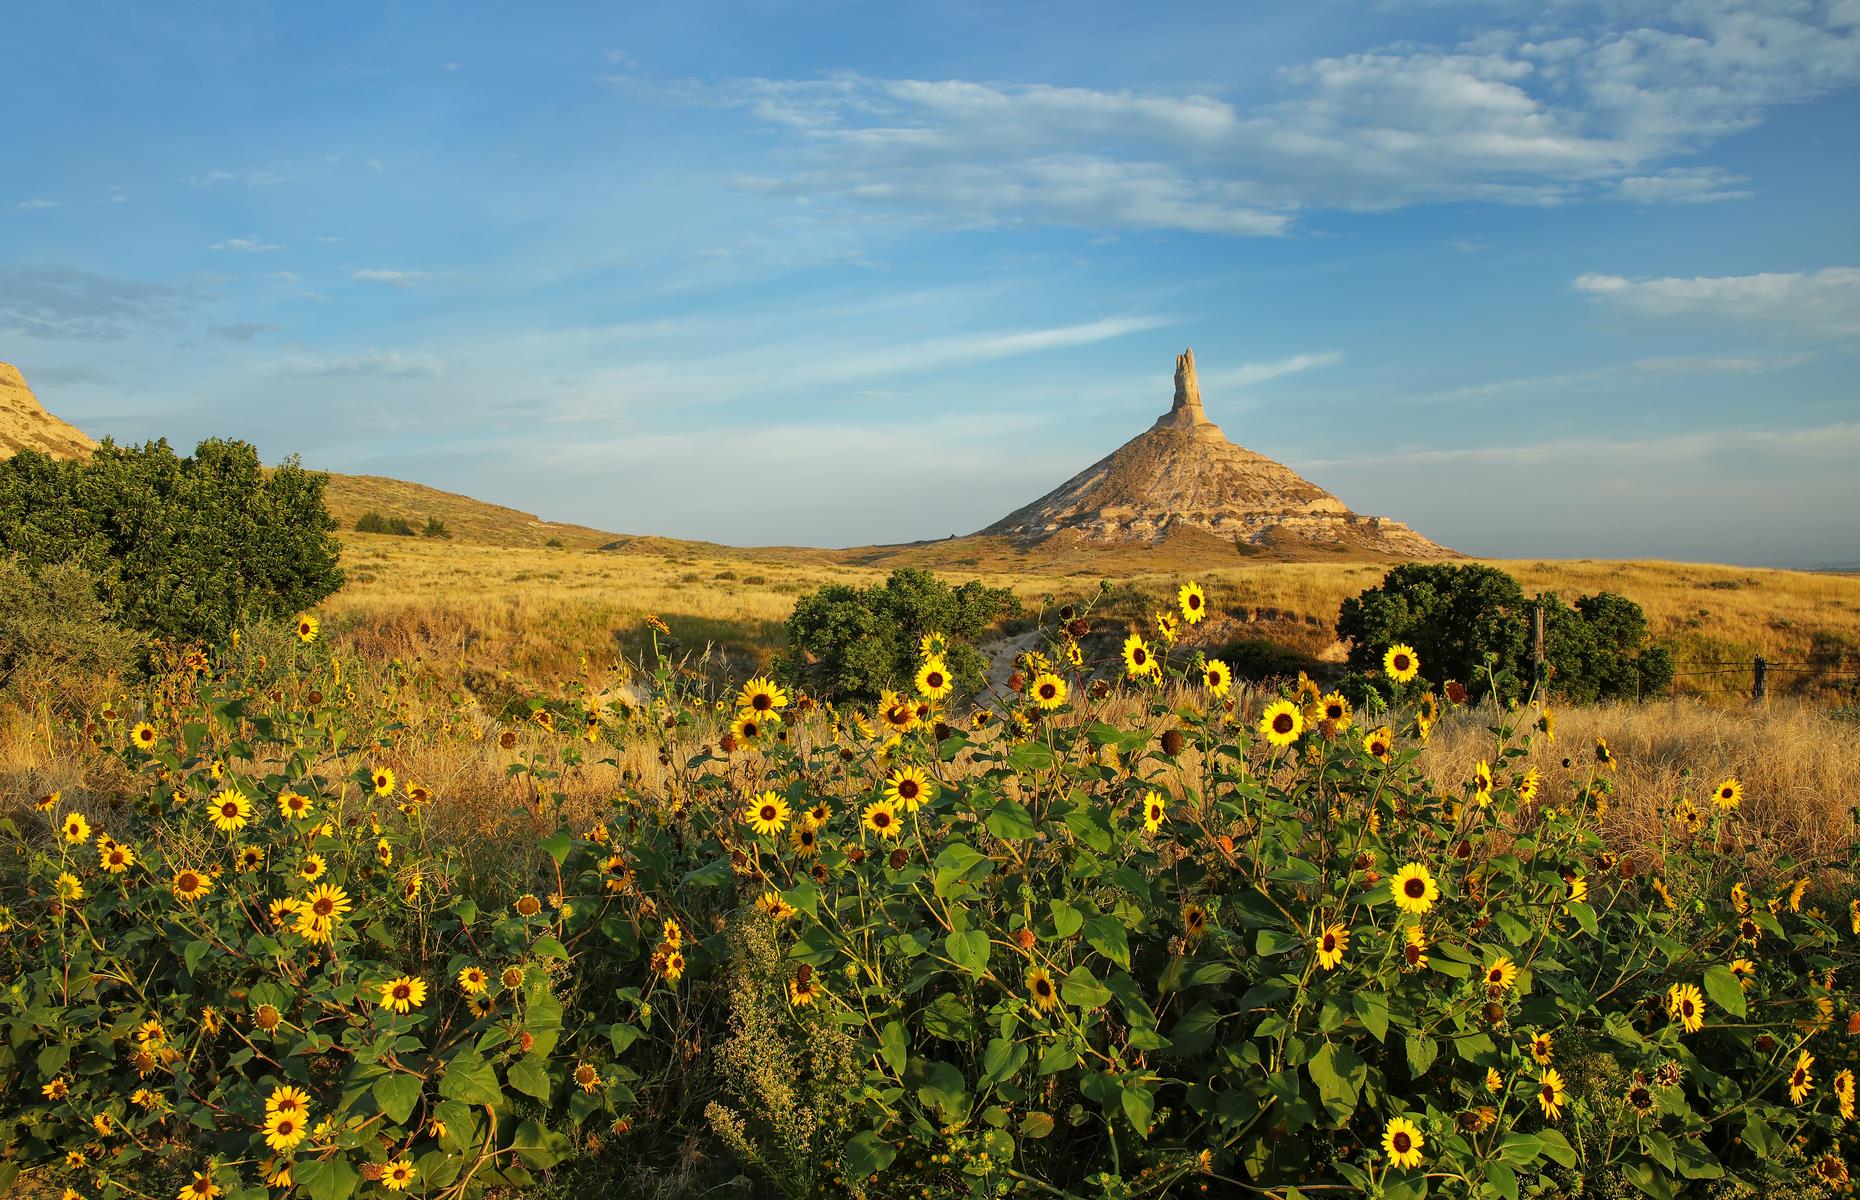 <p>A curious formation in Nebraska's Morrill County, <a href="https://history.nebraska.gov/rock">Chimney Rock</a> is a key stop along the Oregon Trail, a National Historic Trail that traces 2,000-plus miles (3,219km) from east to west. As such, this natural landmark is not just a photo opportunity but also a symbol of the American pioneer and westward migration during the 1800s. Make time to stop by the visitor center, which educates the public on this intriguing hunk of rock and its wider significance.</p>